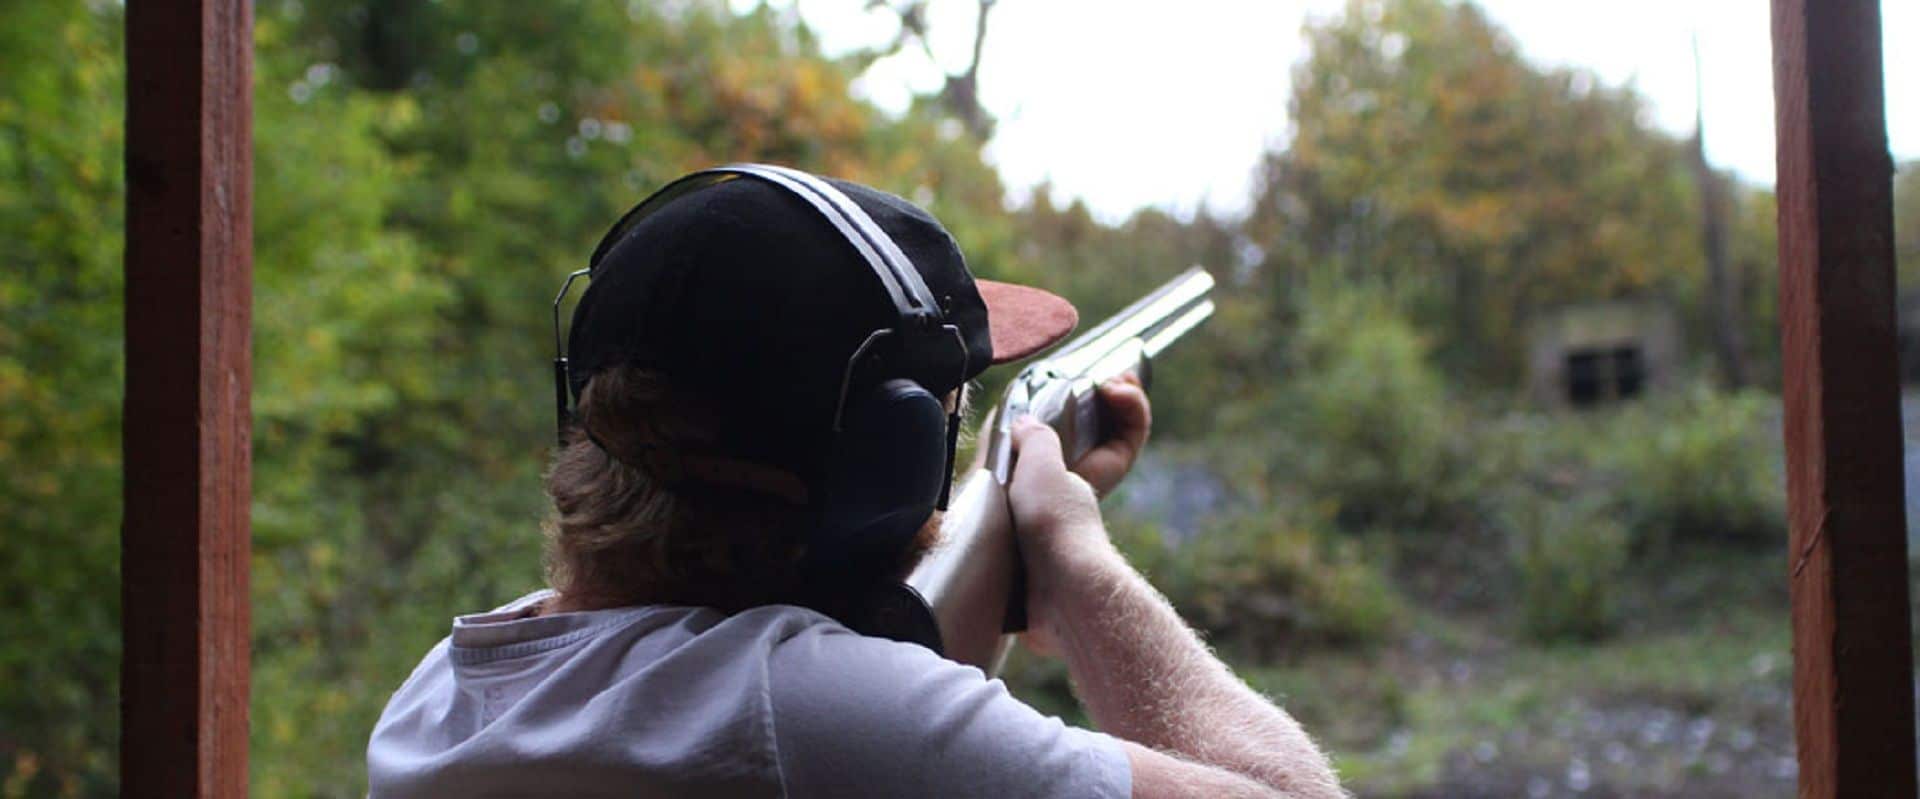 Southern Pursuits - Clay Pigeon Shooting in UK